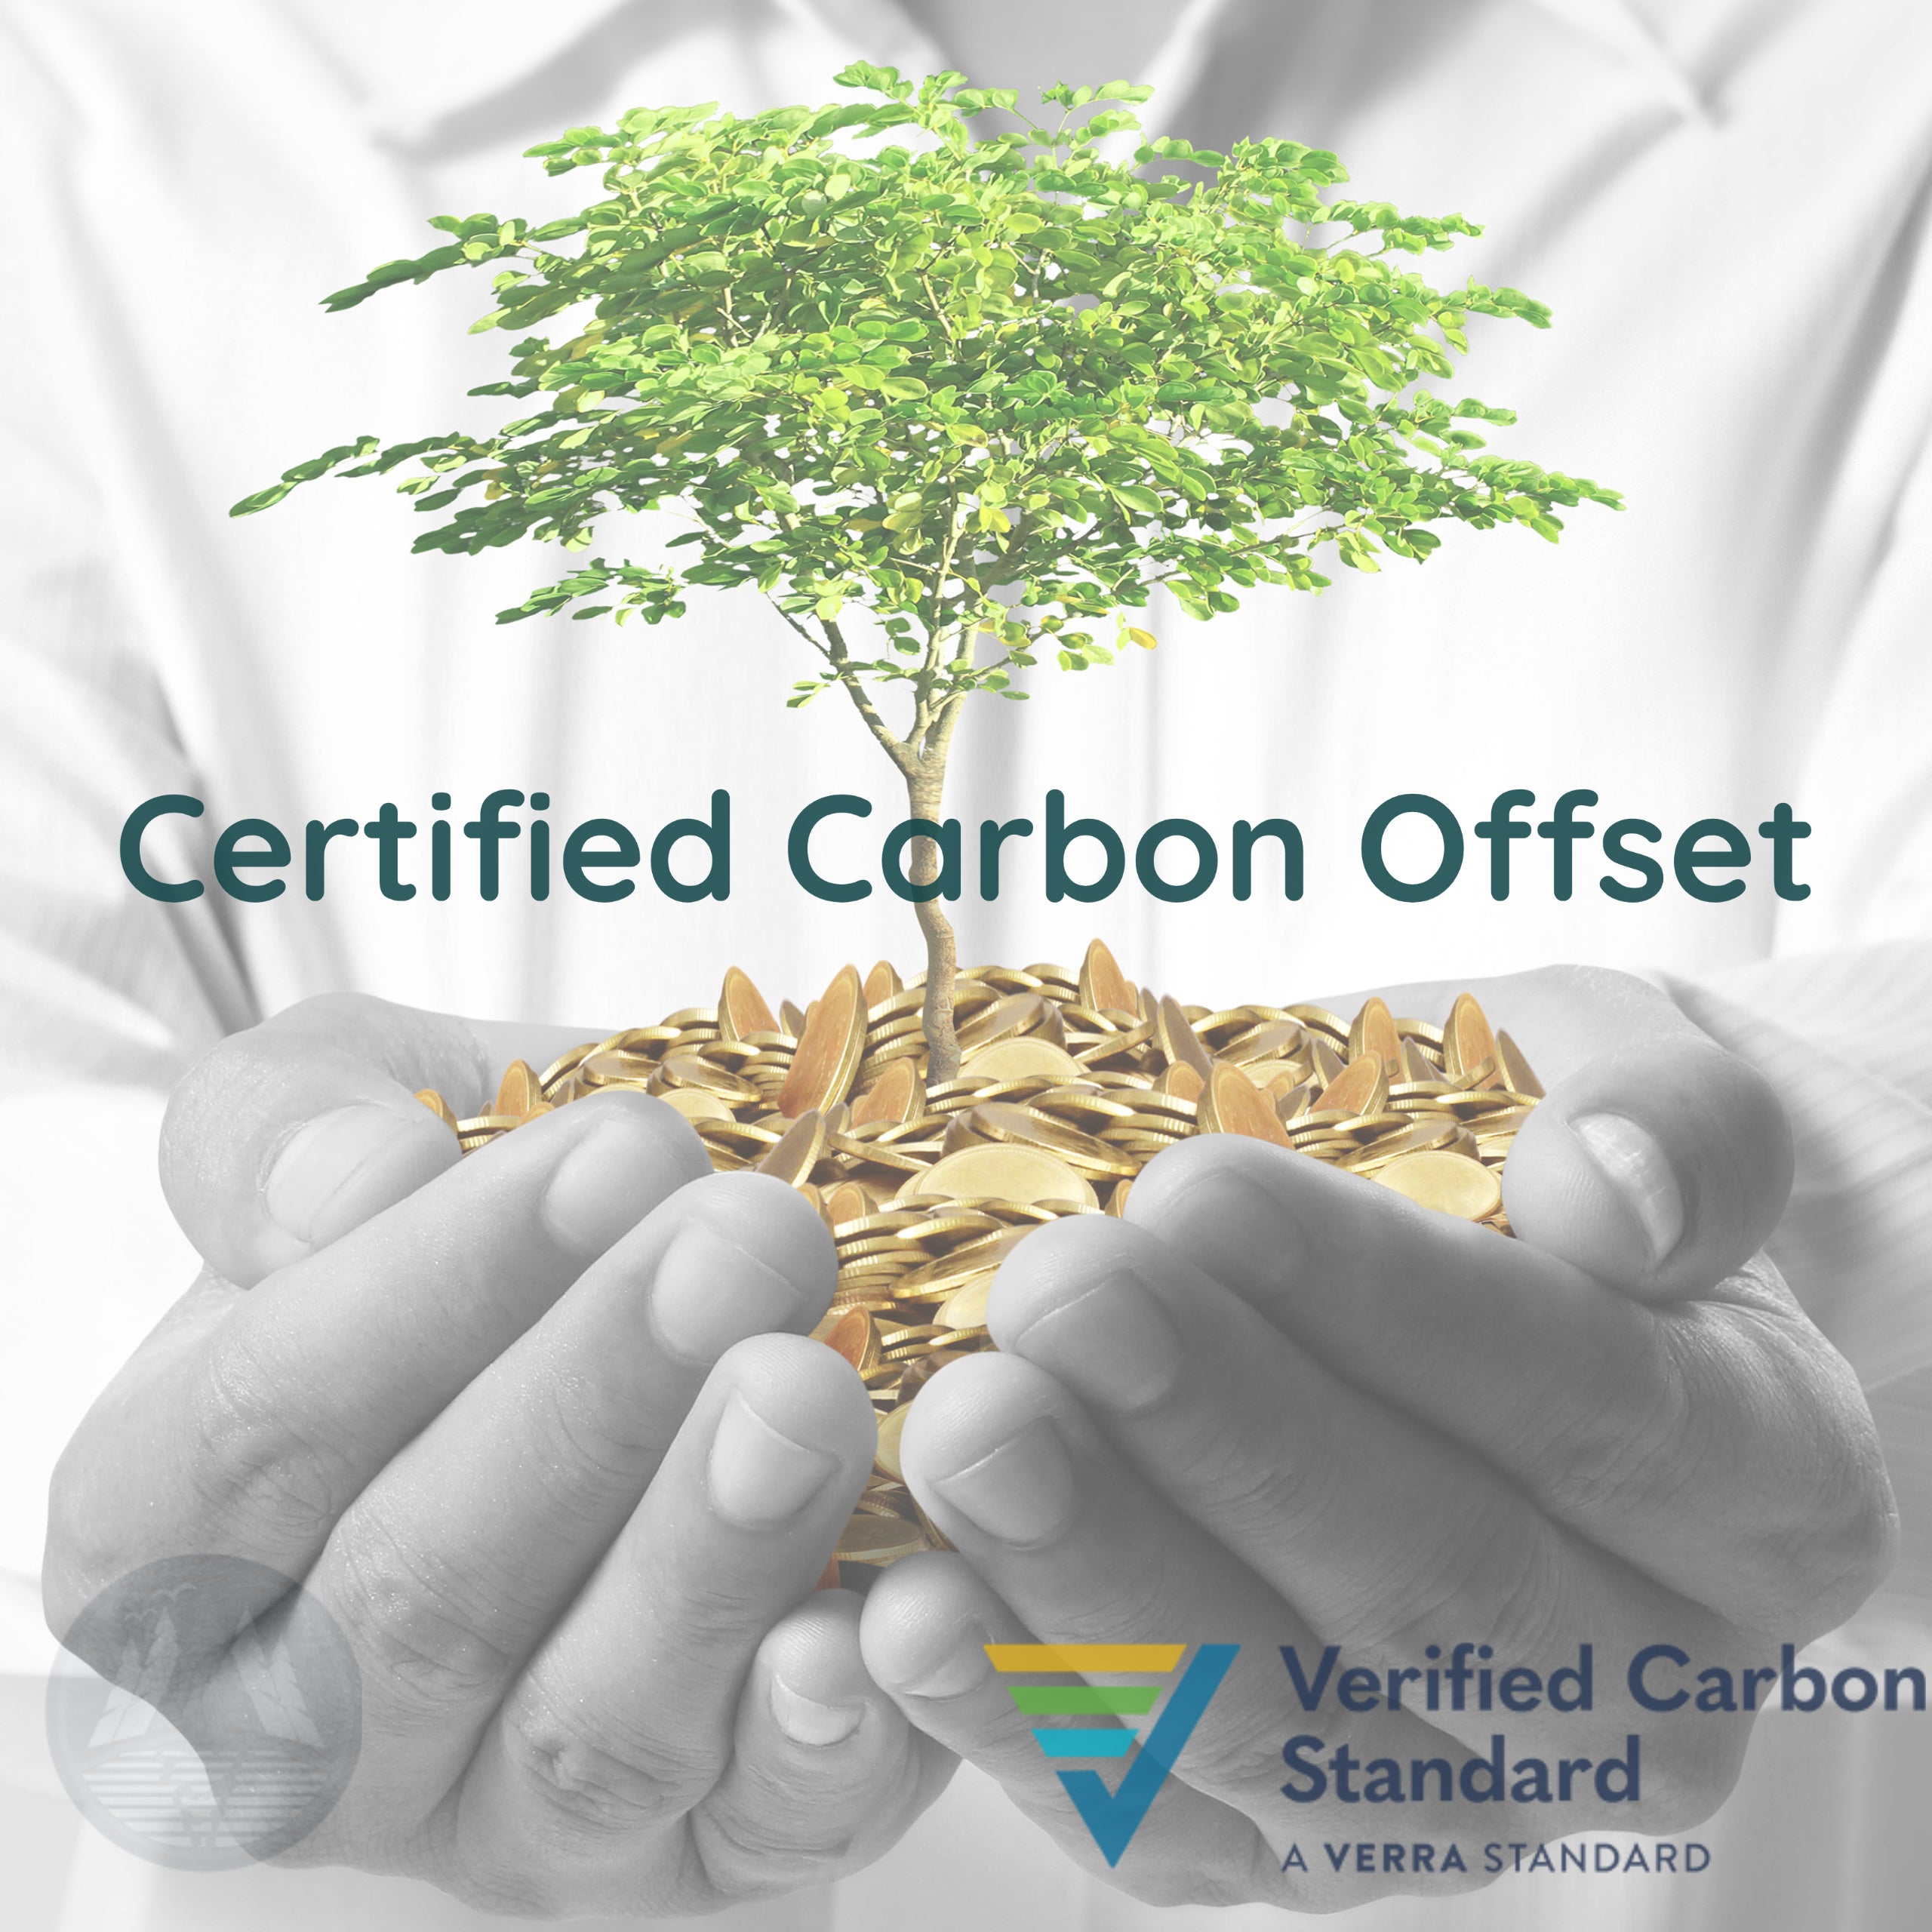 Personal Carbon Offsets